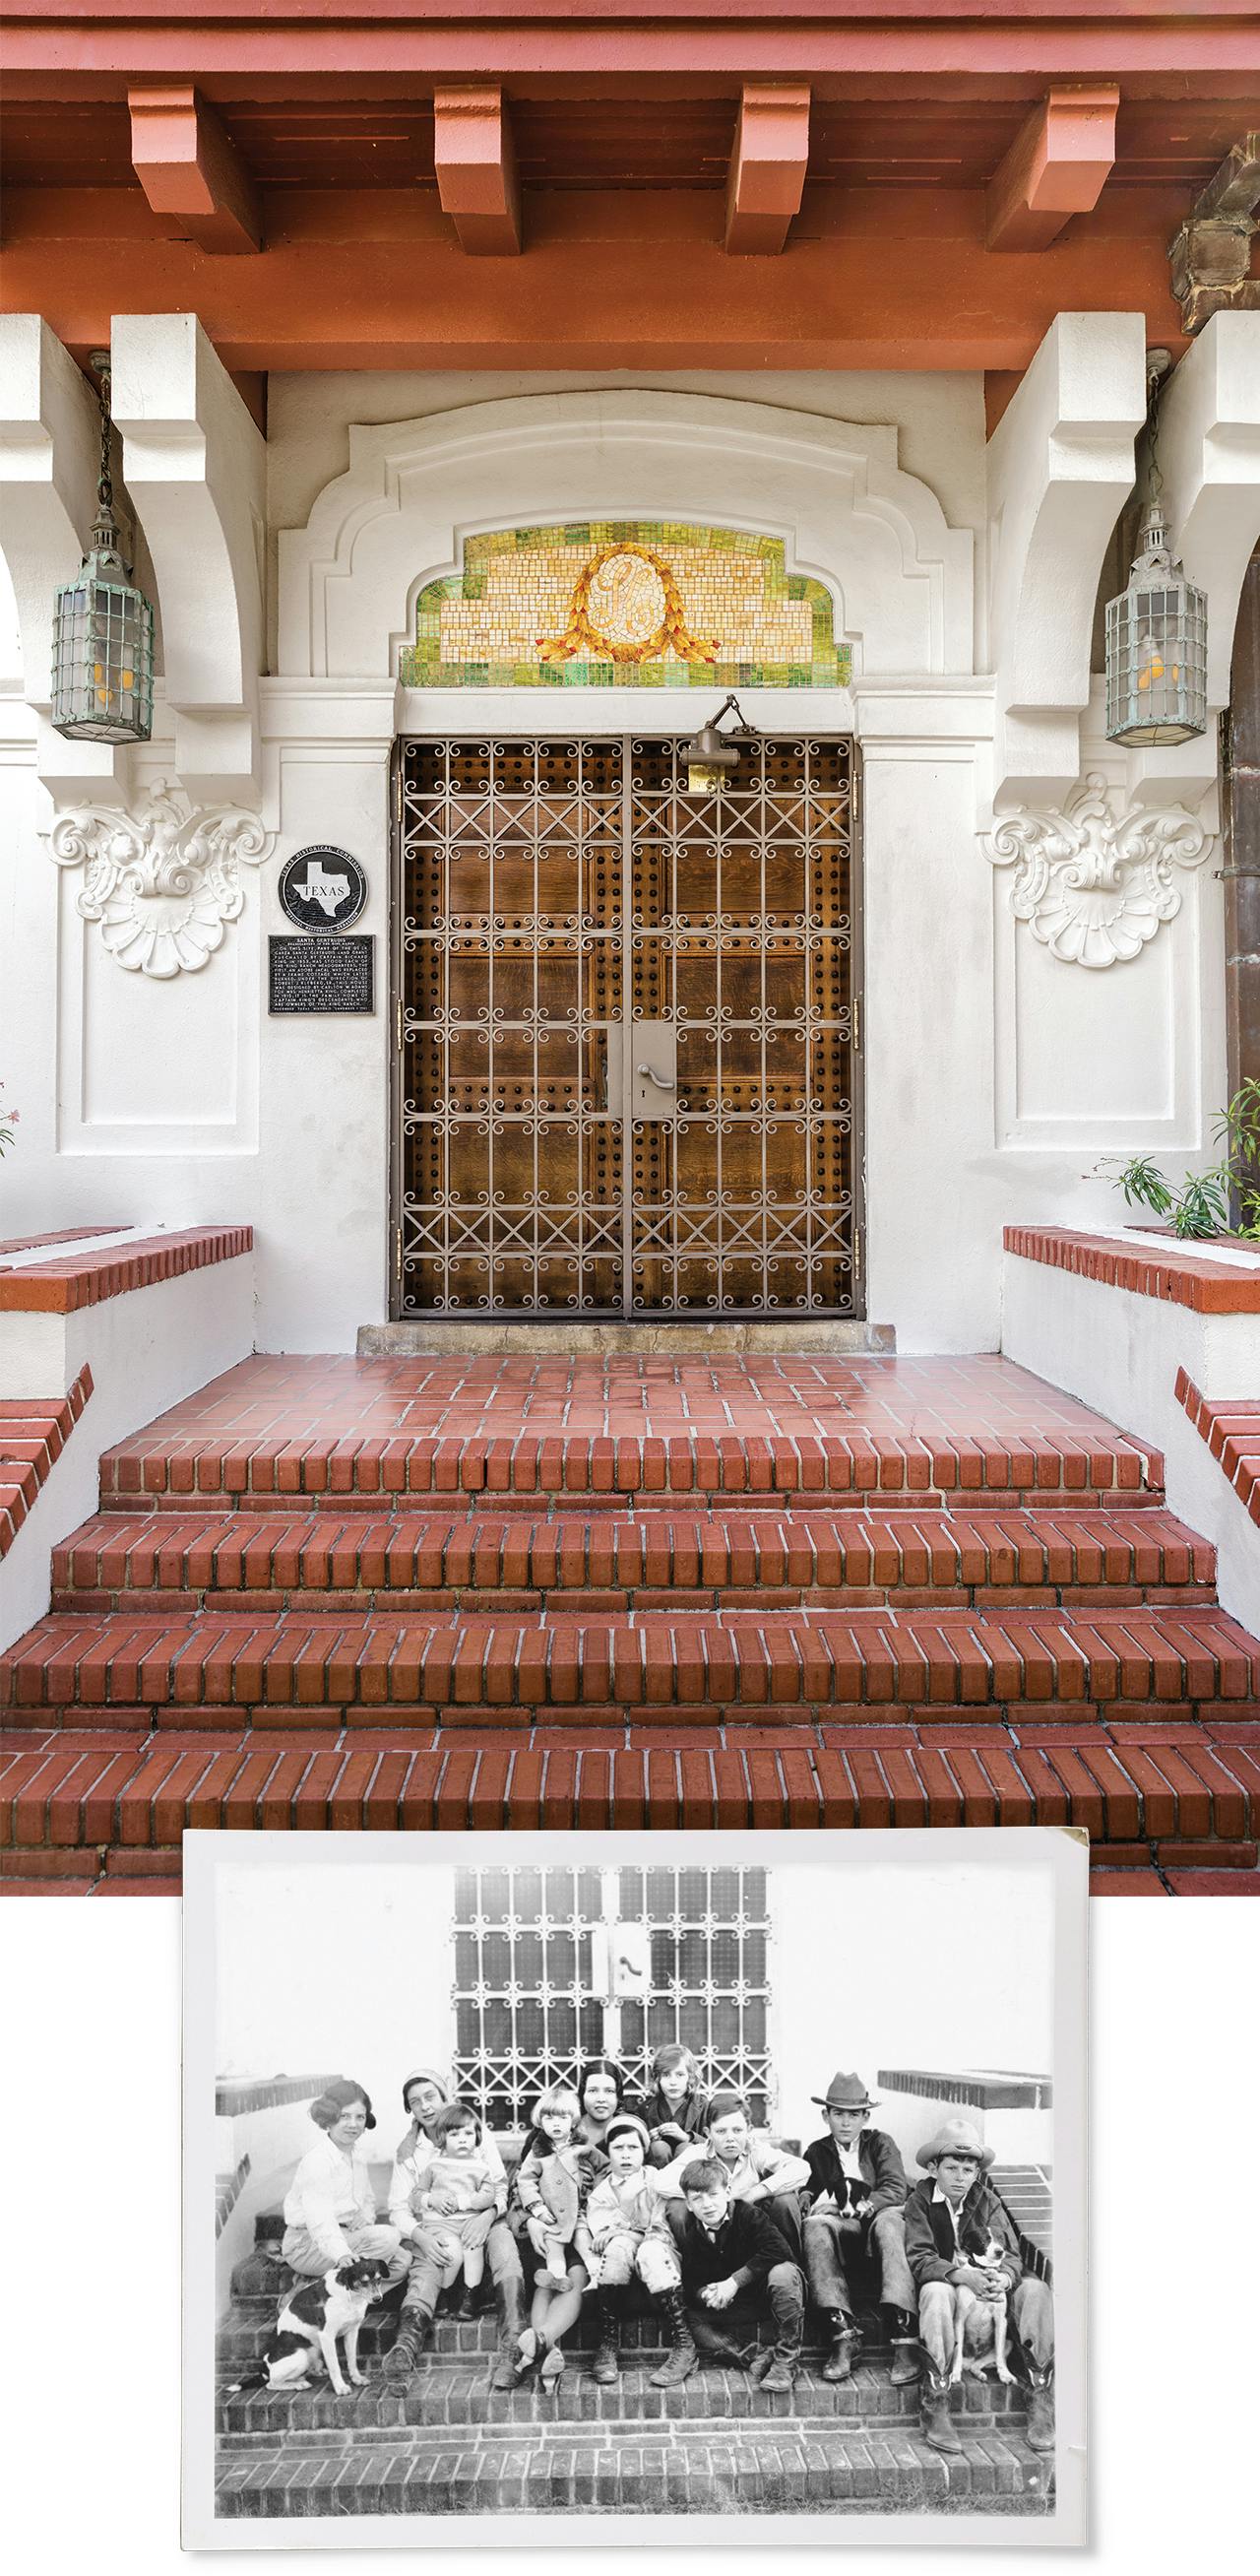 The north entrance to the King Ranch Main House features art glass inlaid with the letter K above the door and an ornamental gate designed by Tiffany; the members of the King family sit outside that same north entrance in an undated photo.